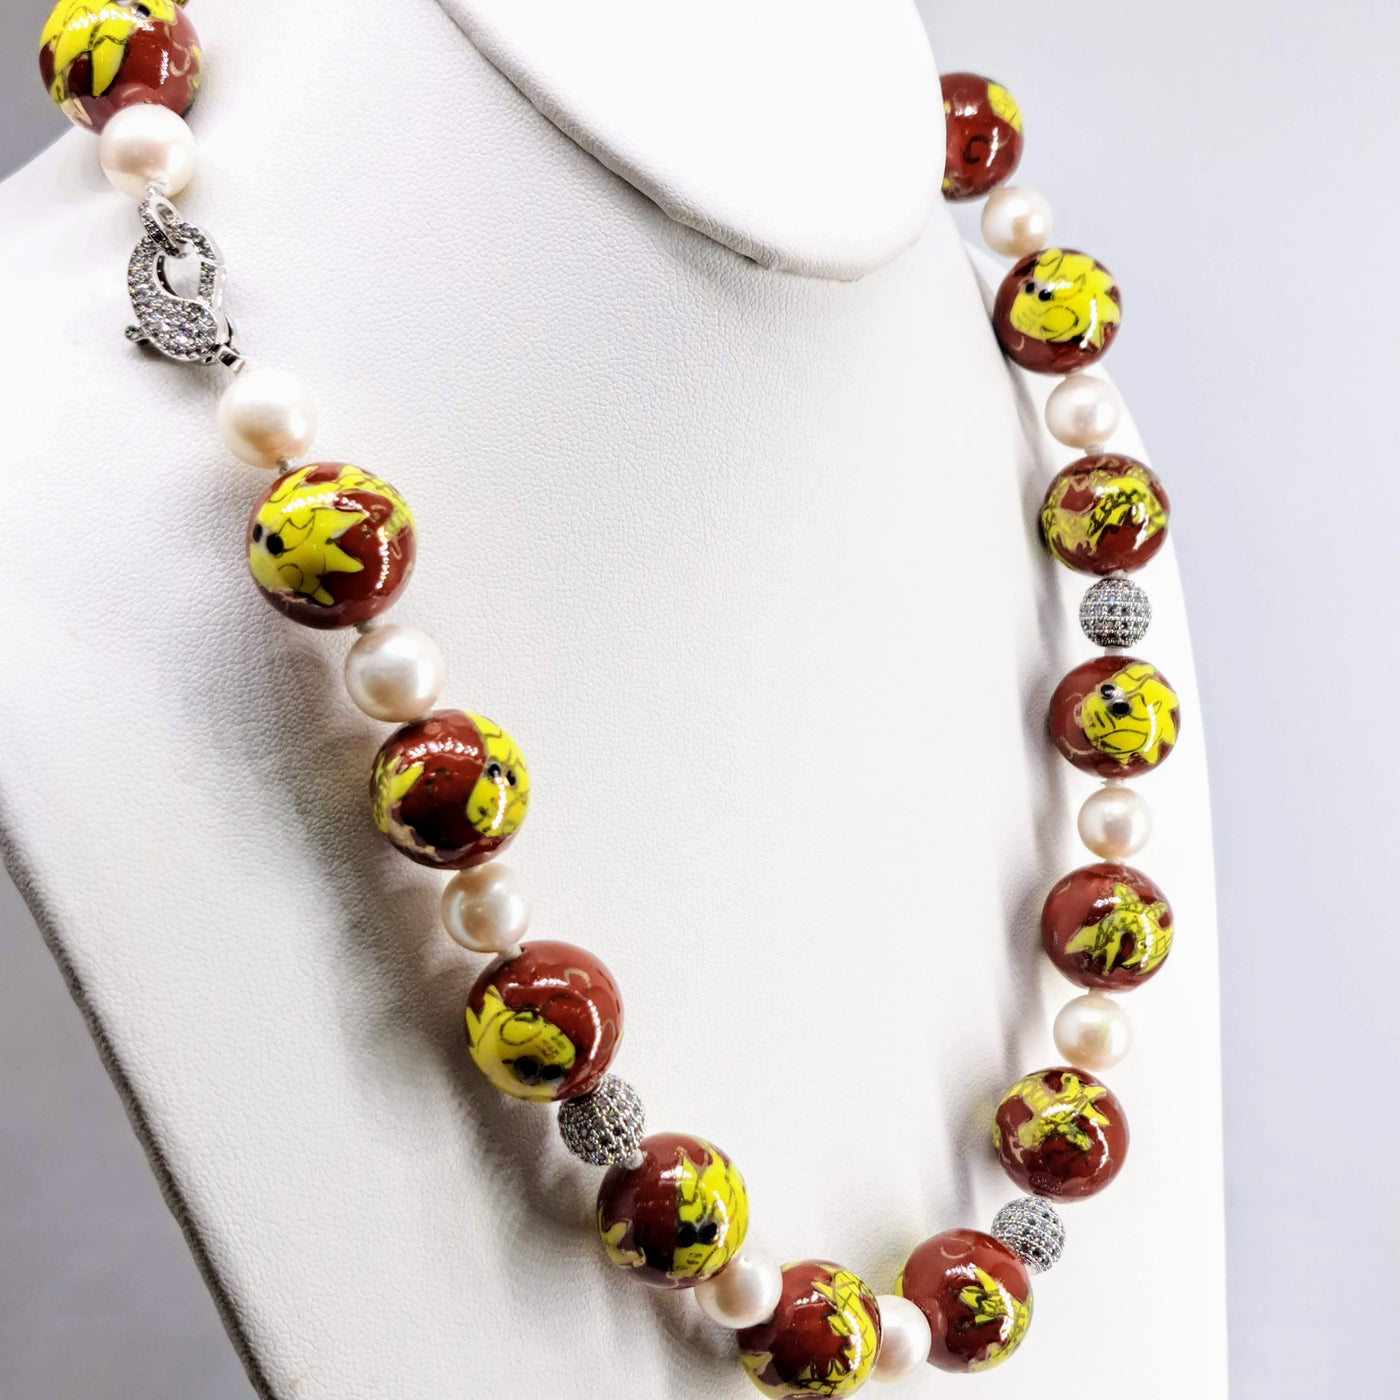 "Spicy Dragon Balls" 22" Necklace - Porcelain, Pearls, Crystal Pave', Sterling, Decorative Clasp